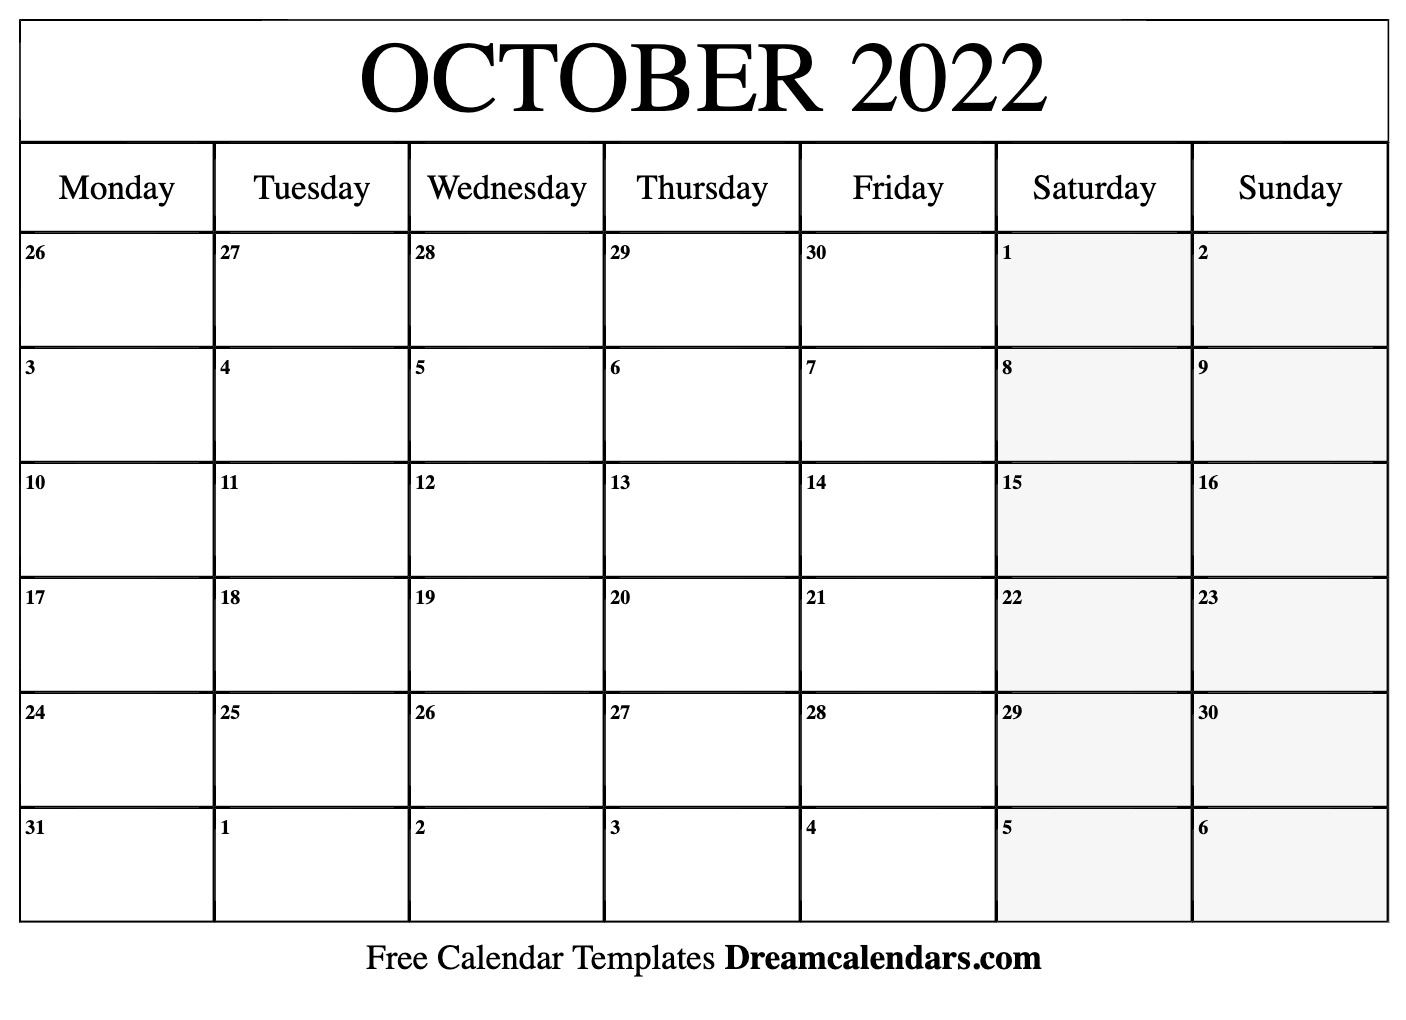 October 2022 Calendar Free Blank Printable With Holidays